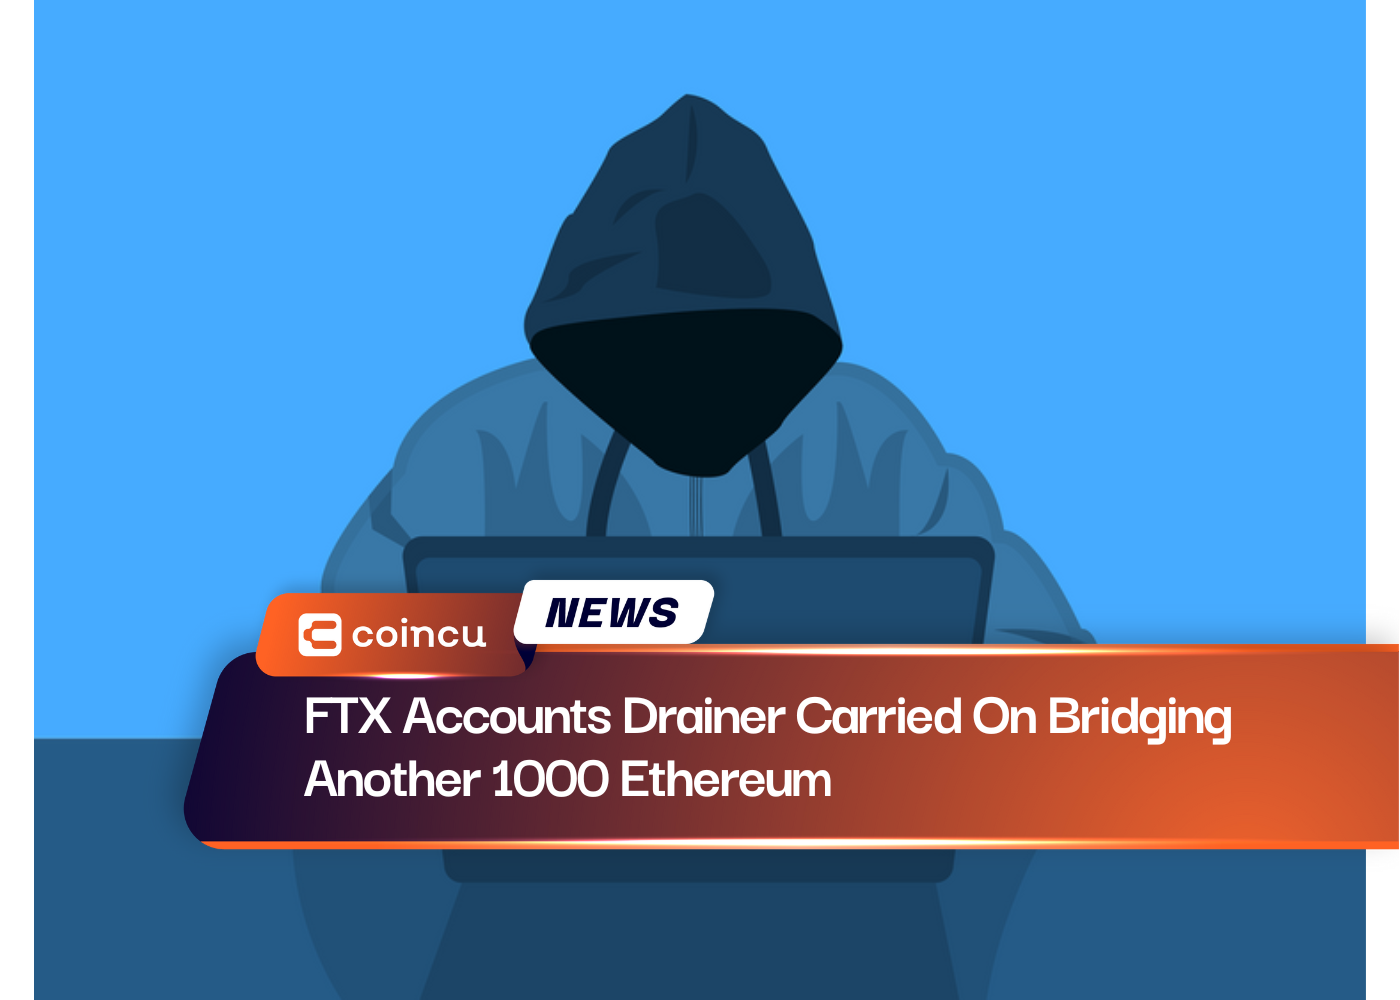 FTX Accounts Drainer Carried On Bridging Another 1000 Ethereum